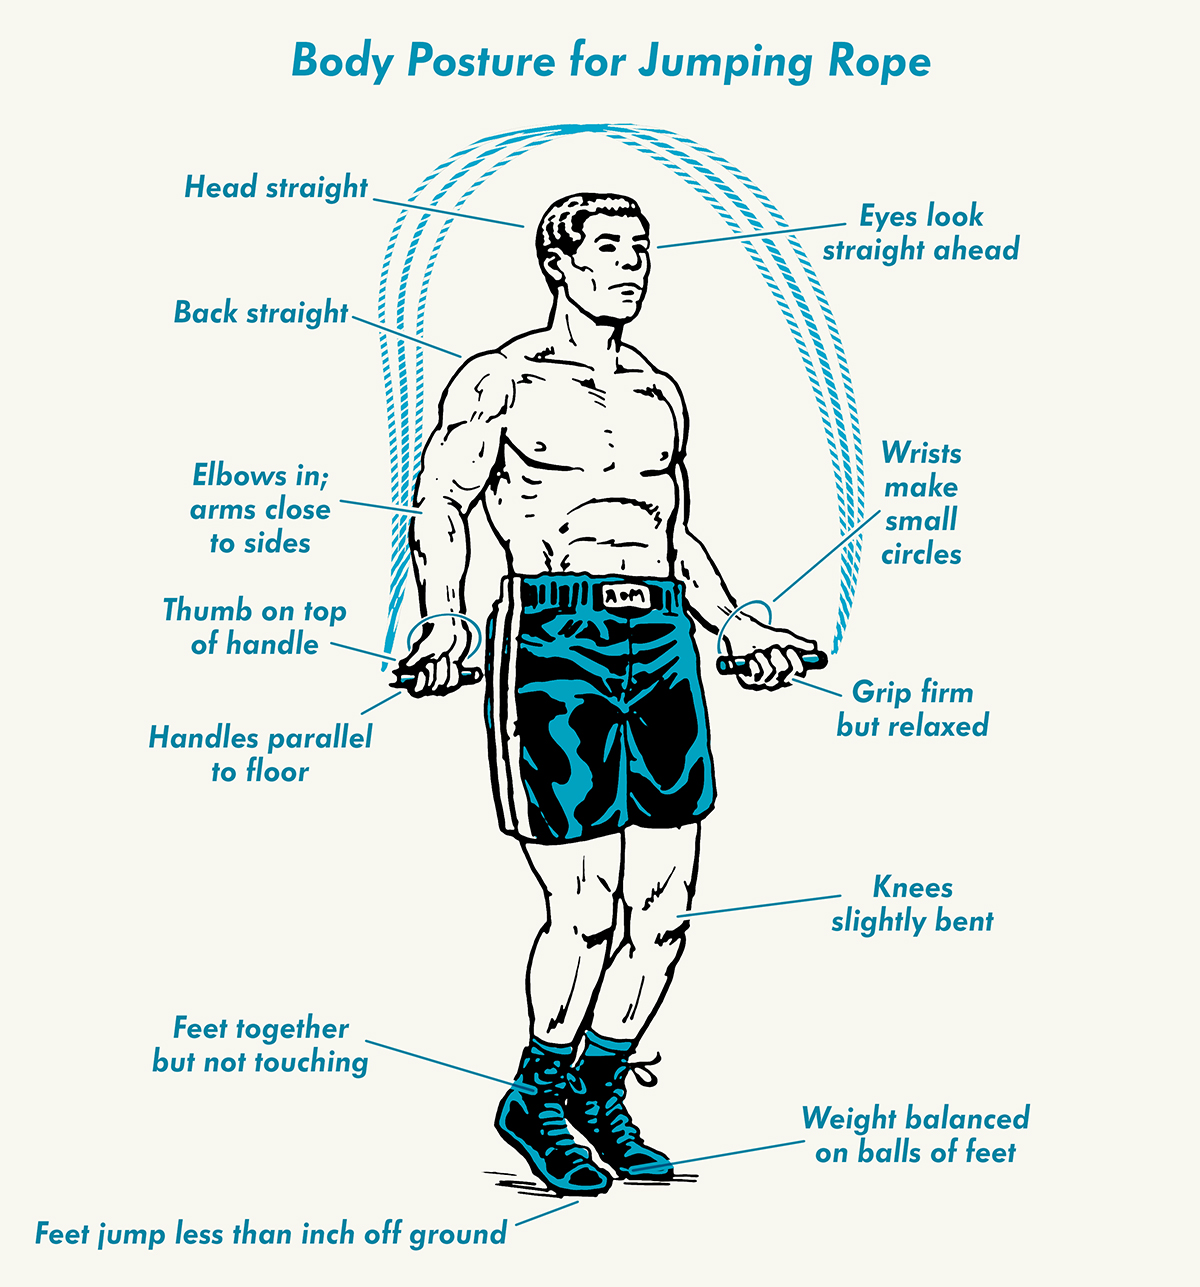 Man poster for jumping rope.